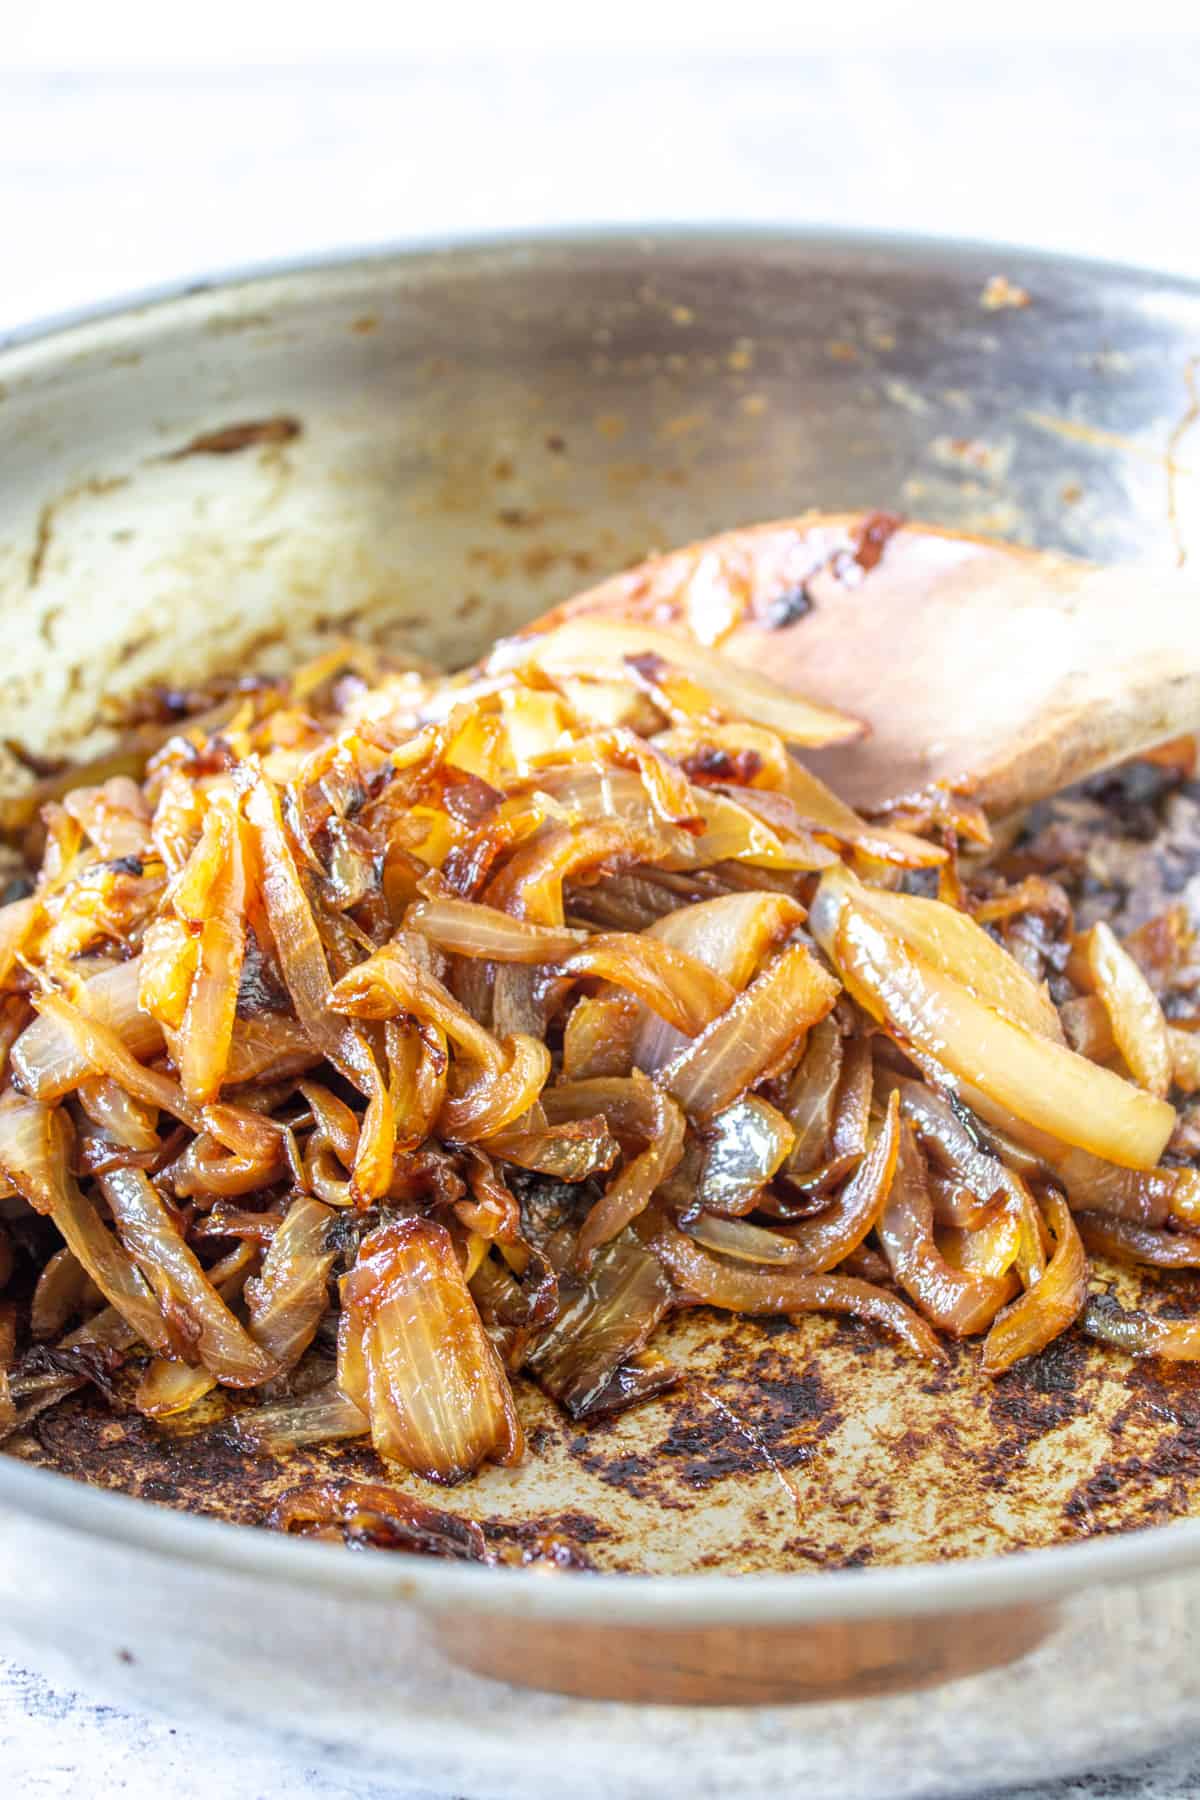 Browned onions in a frying pan.